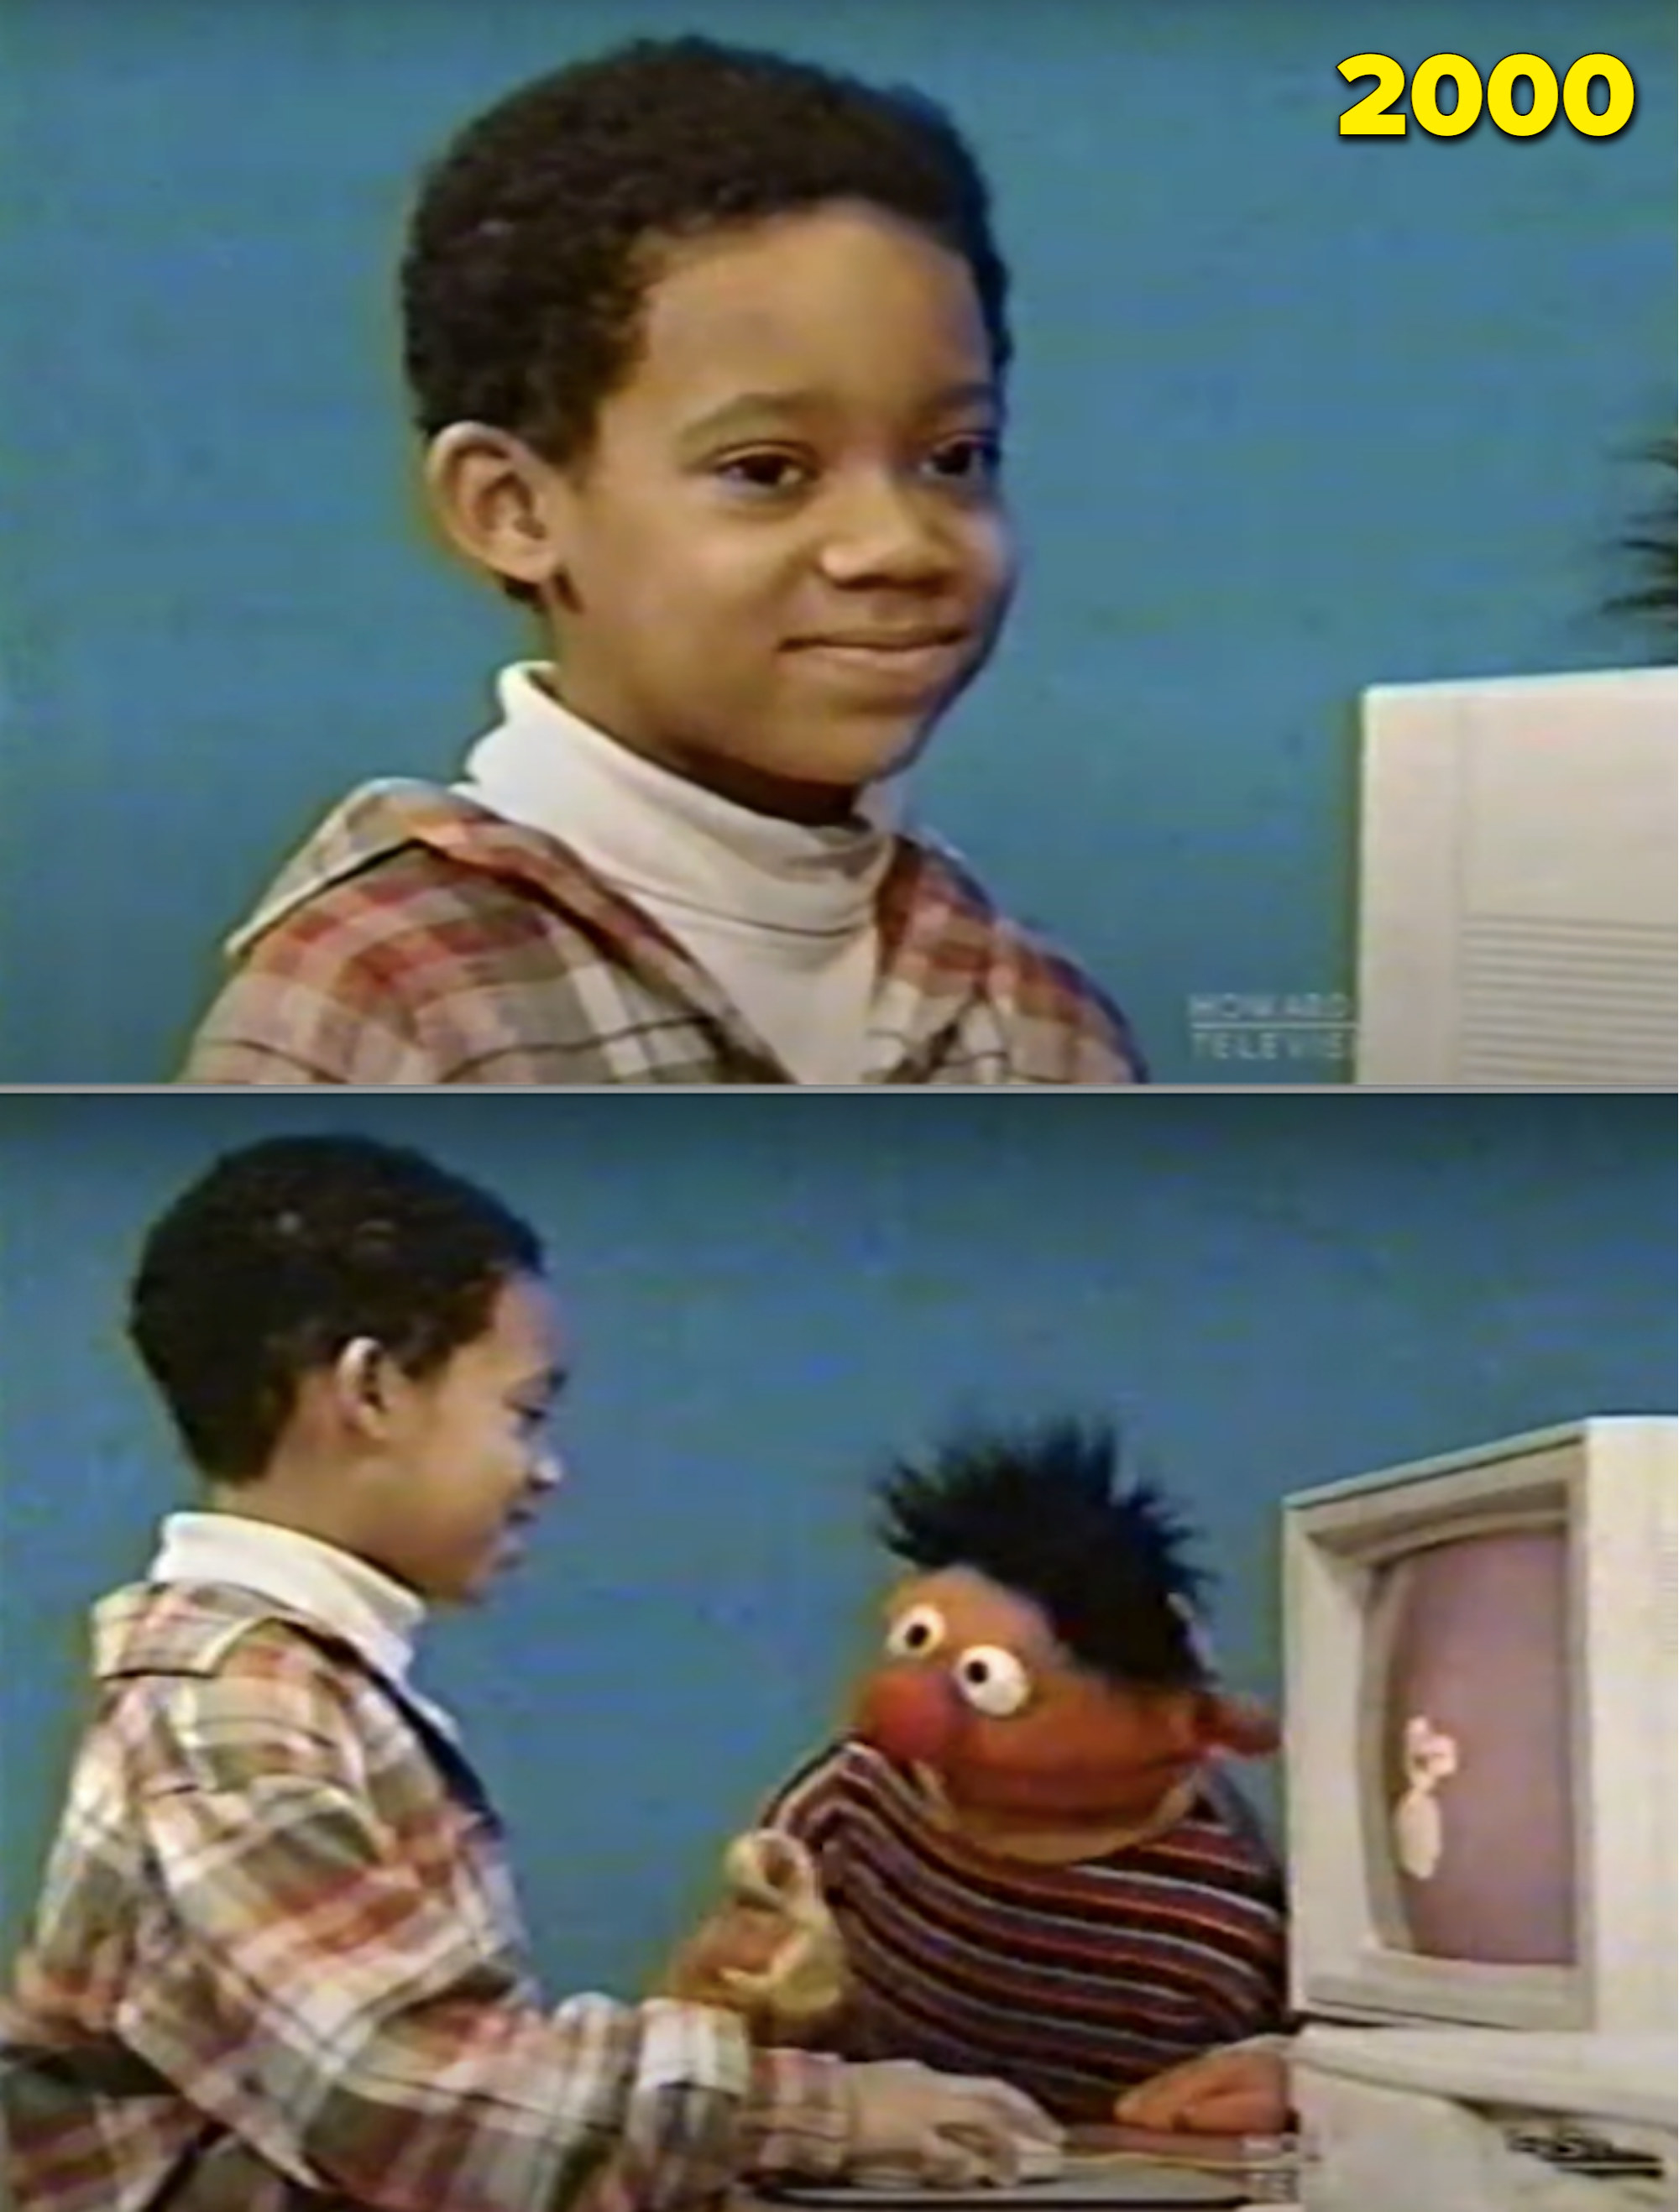 Tyler and Ernie on the computer